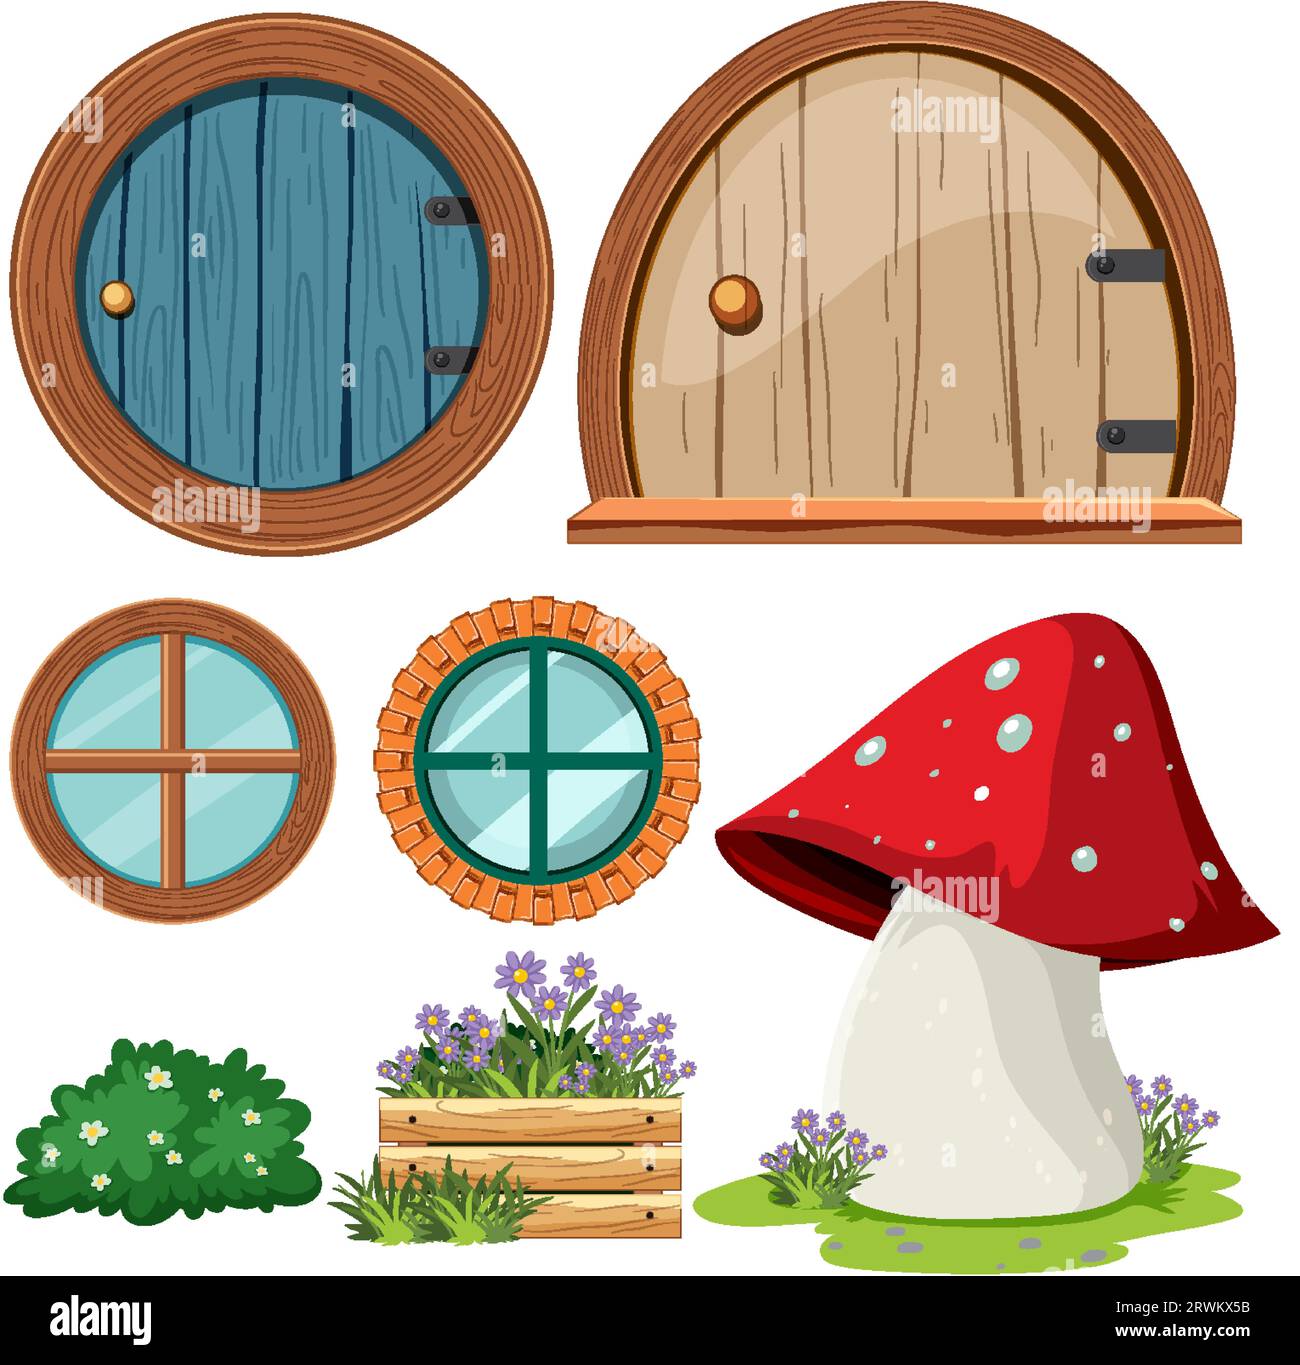 Set of fairy tales house elements illustration Stock Vector